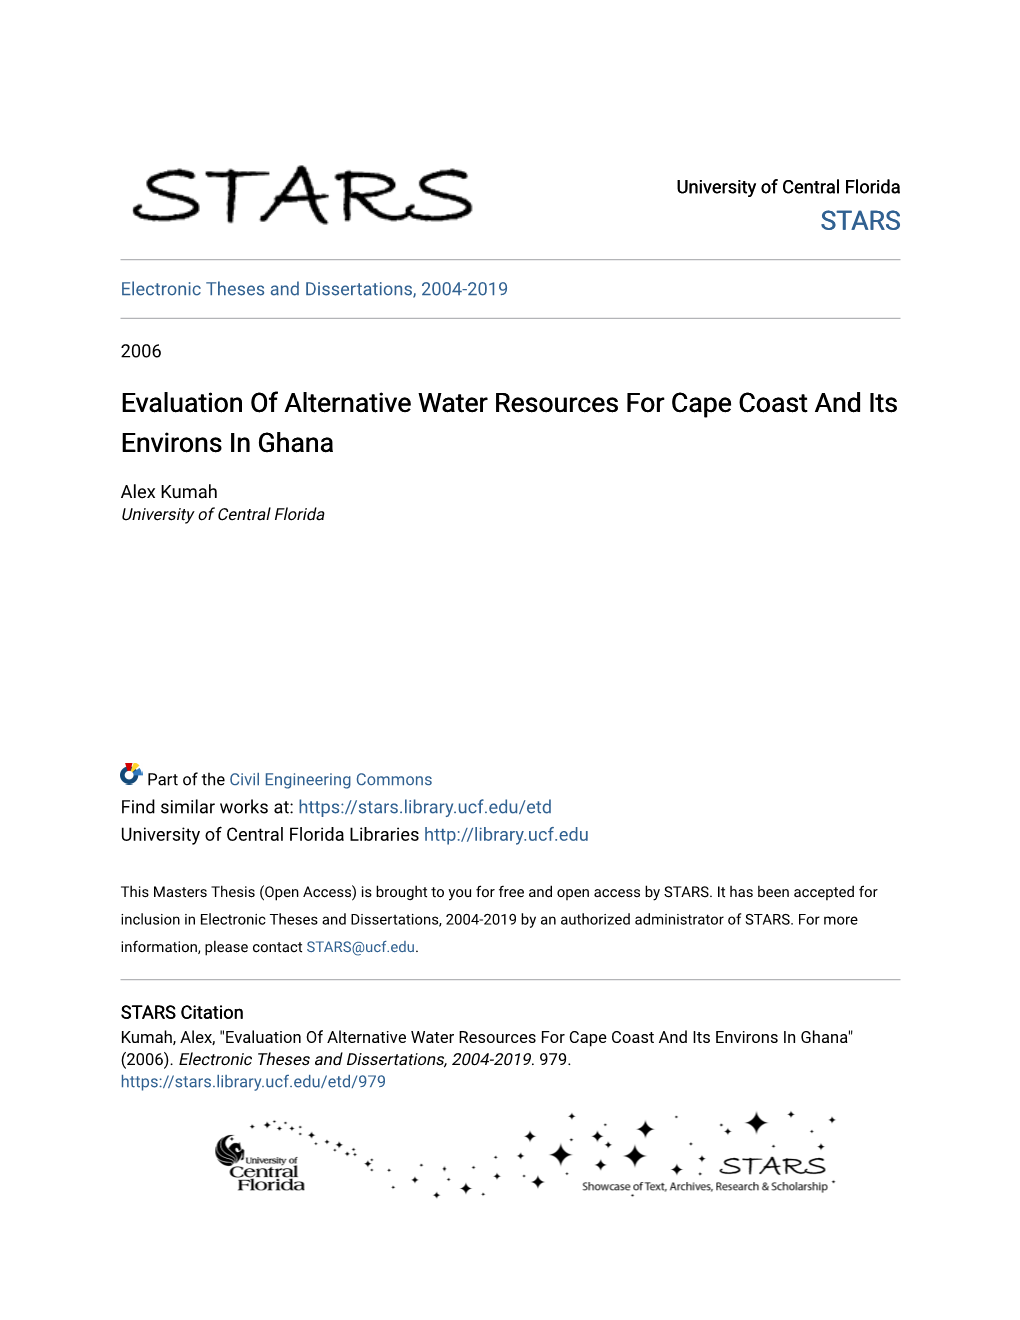 Evaluation of Alternative Water Resources for Cape Coast and Its Environs in Ghana